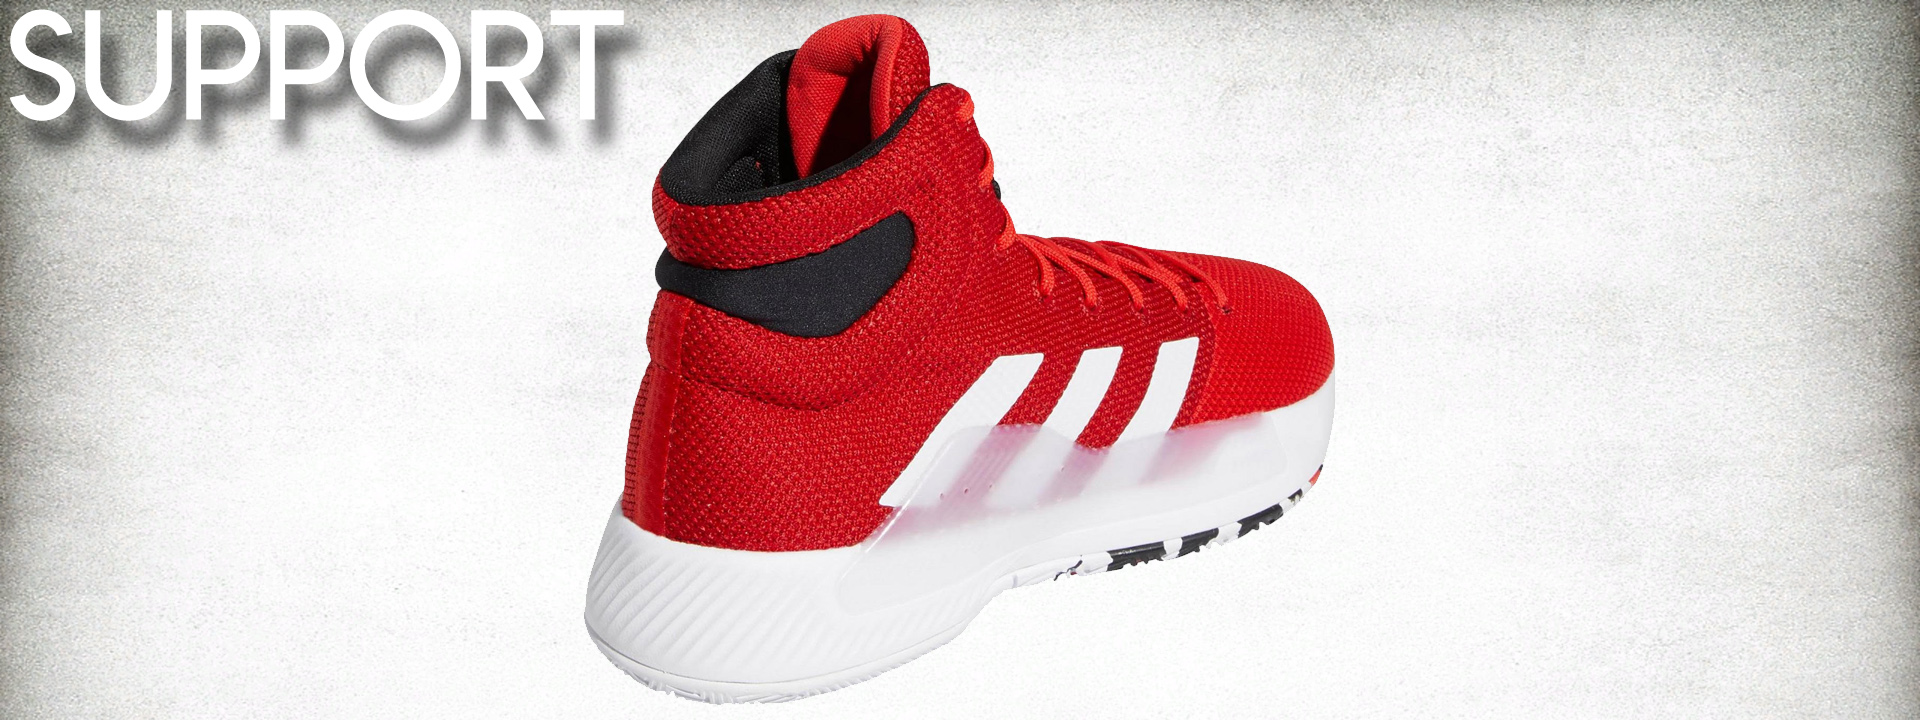 adidas pro bounce madness 219 review